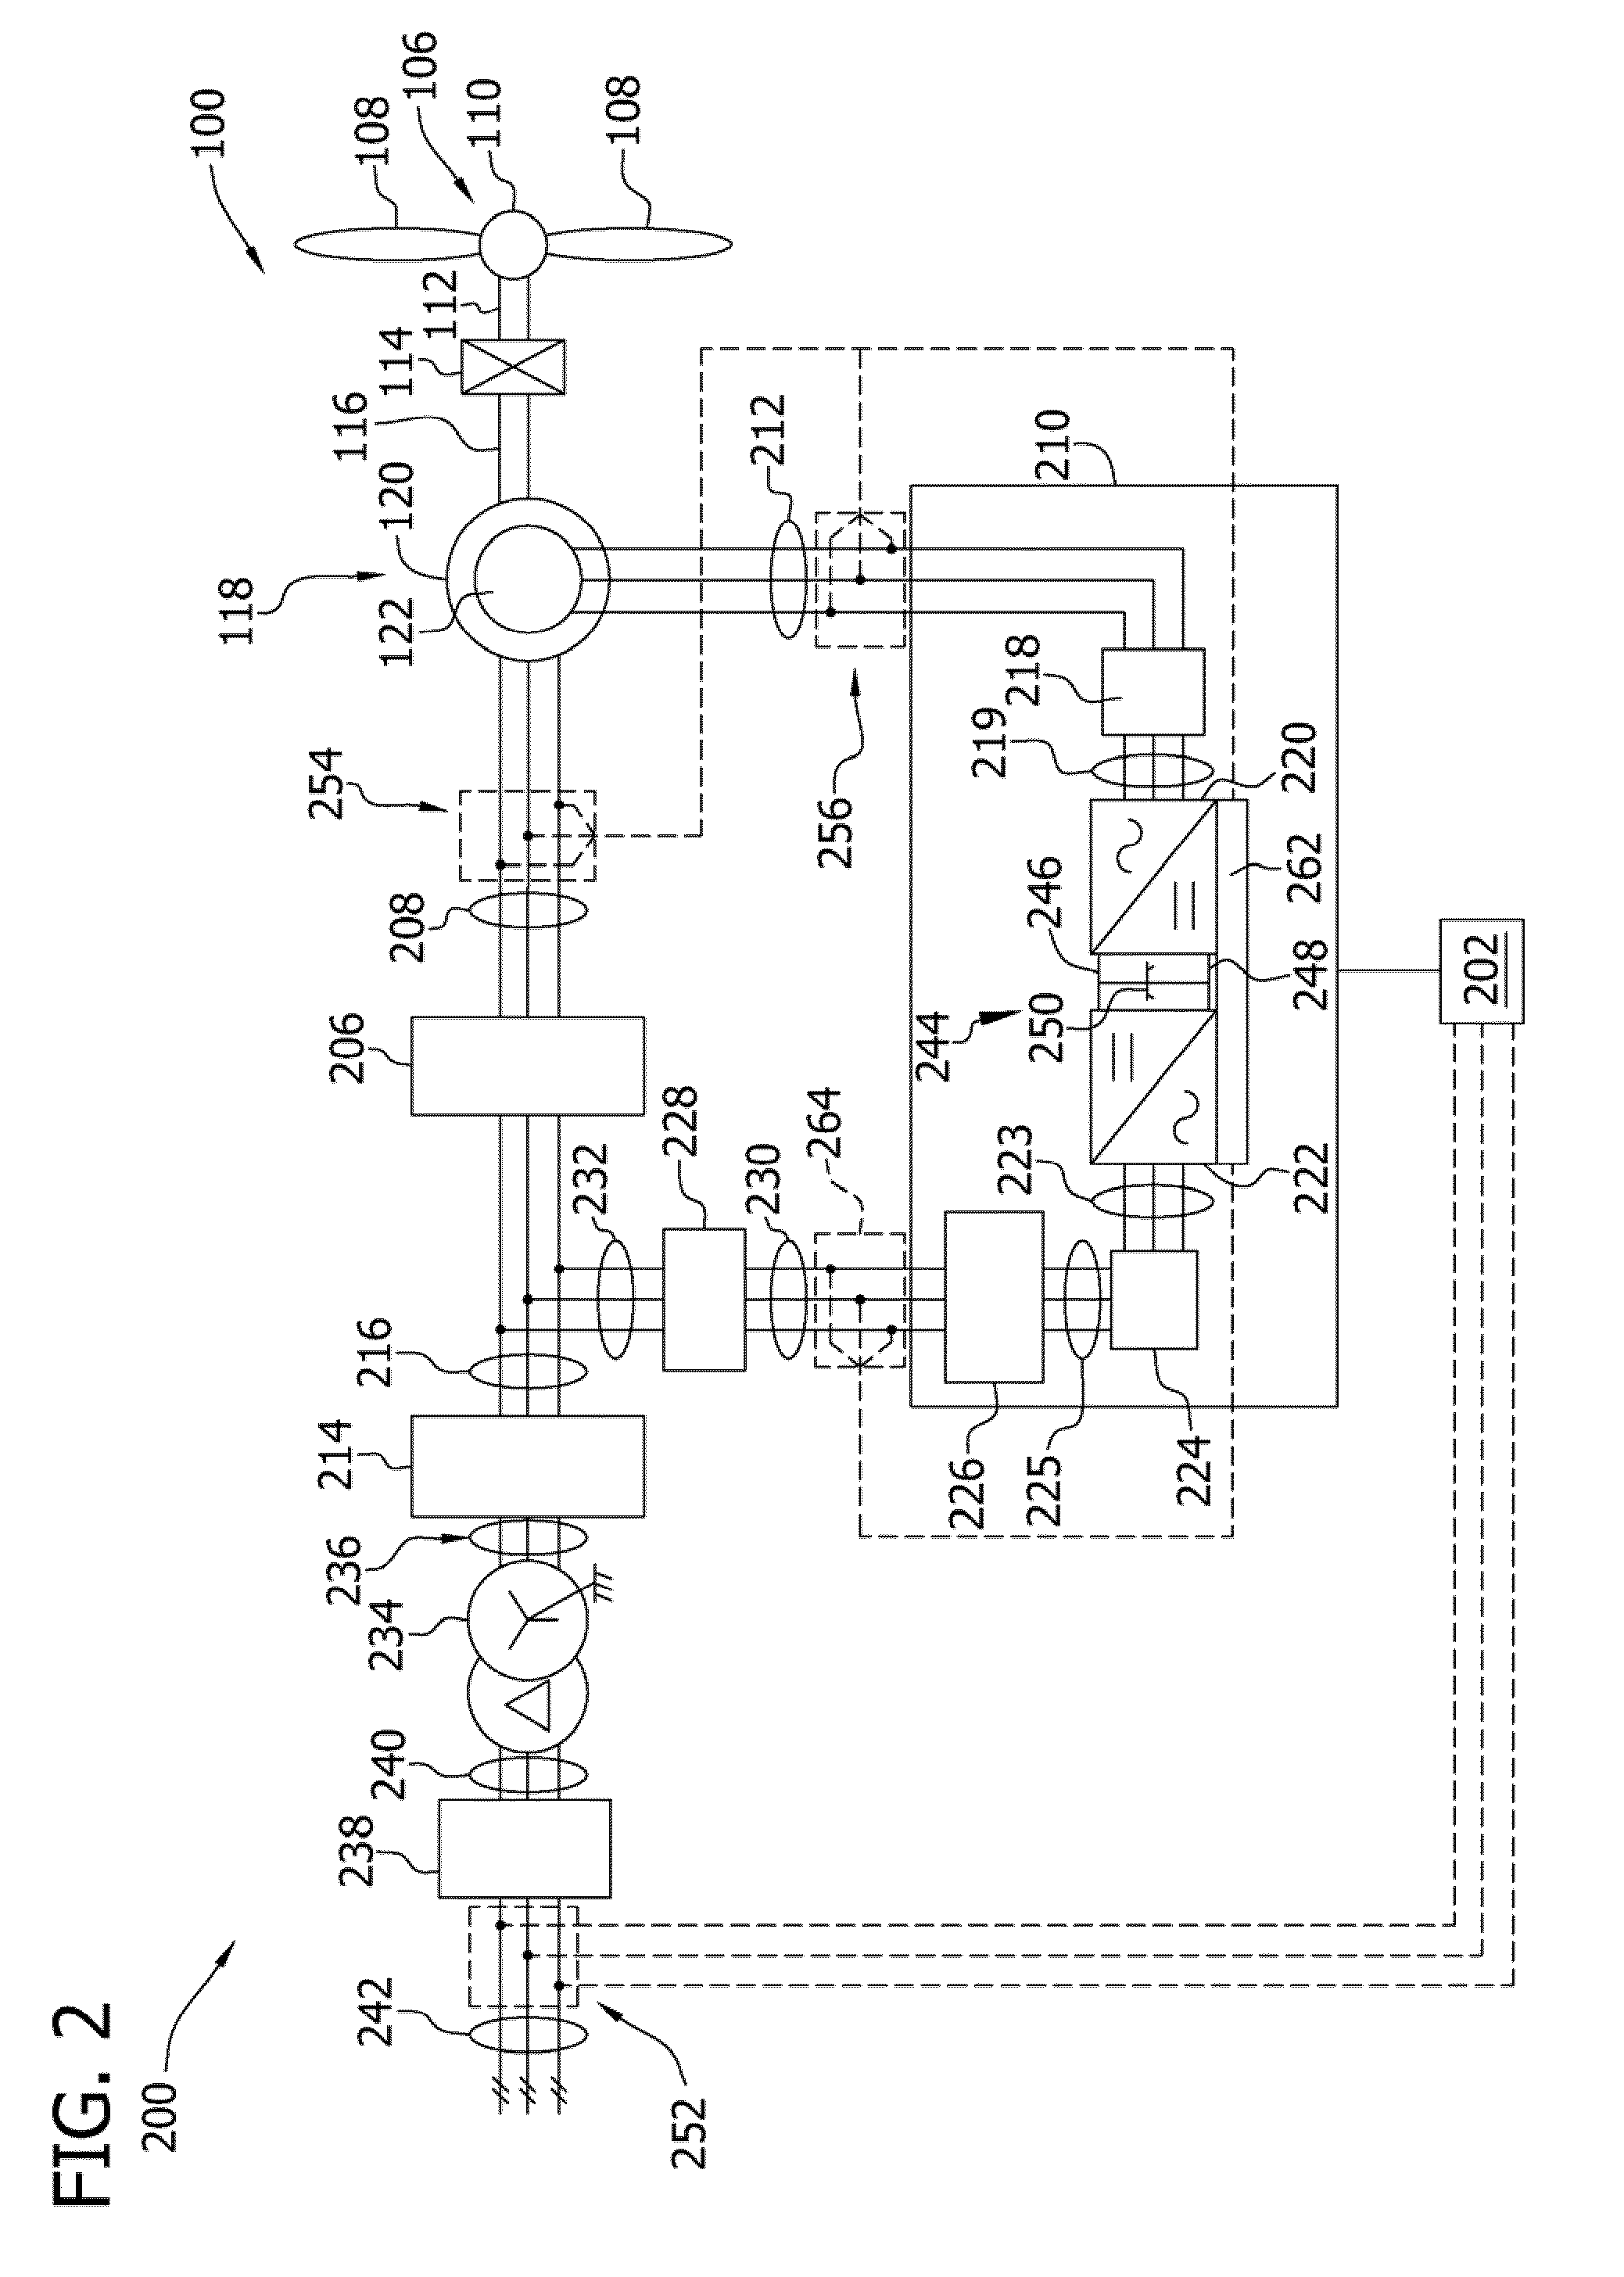 Overspeed protection system and method